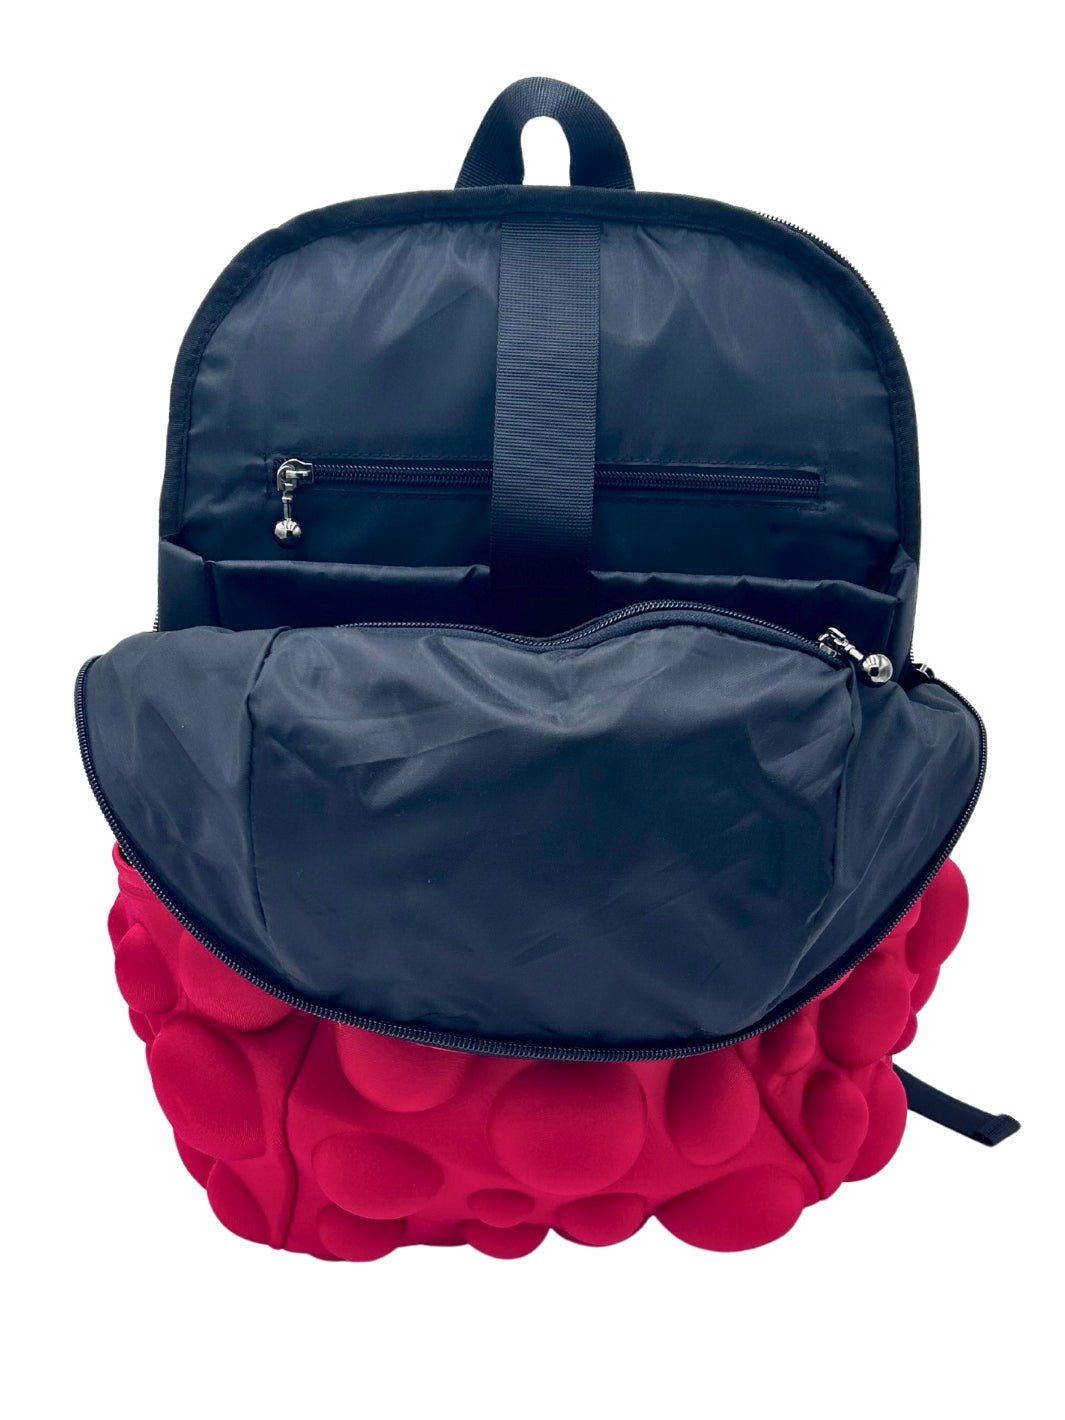 Inside View of Hot Tamale Streetwear Backpack with Bubbles | Madpax